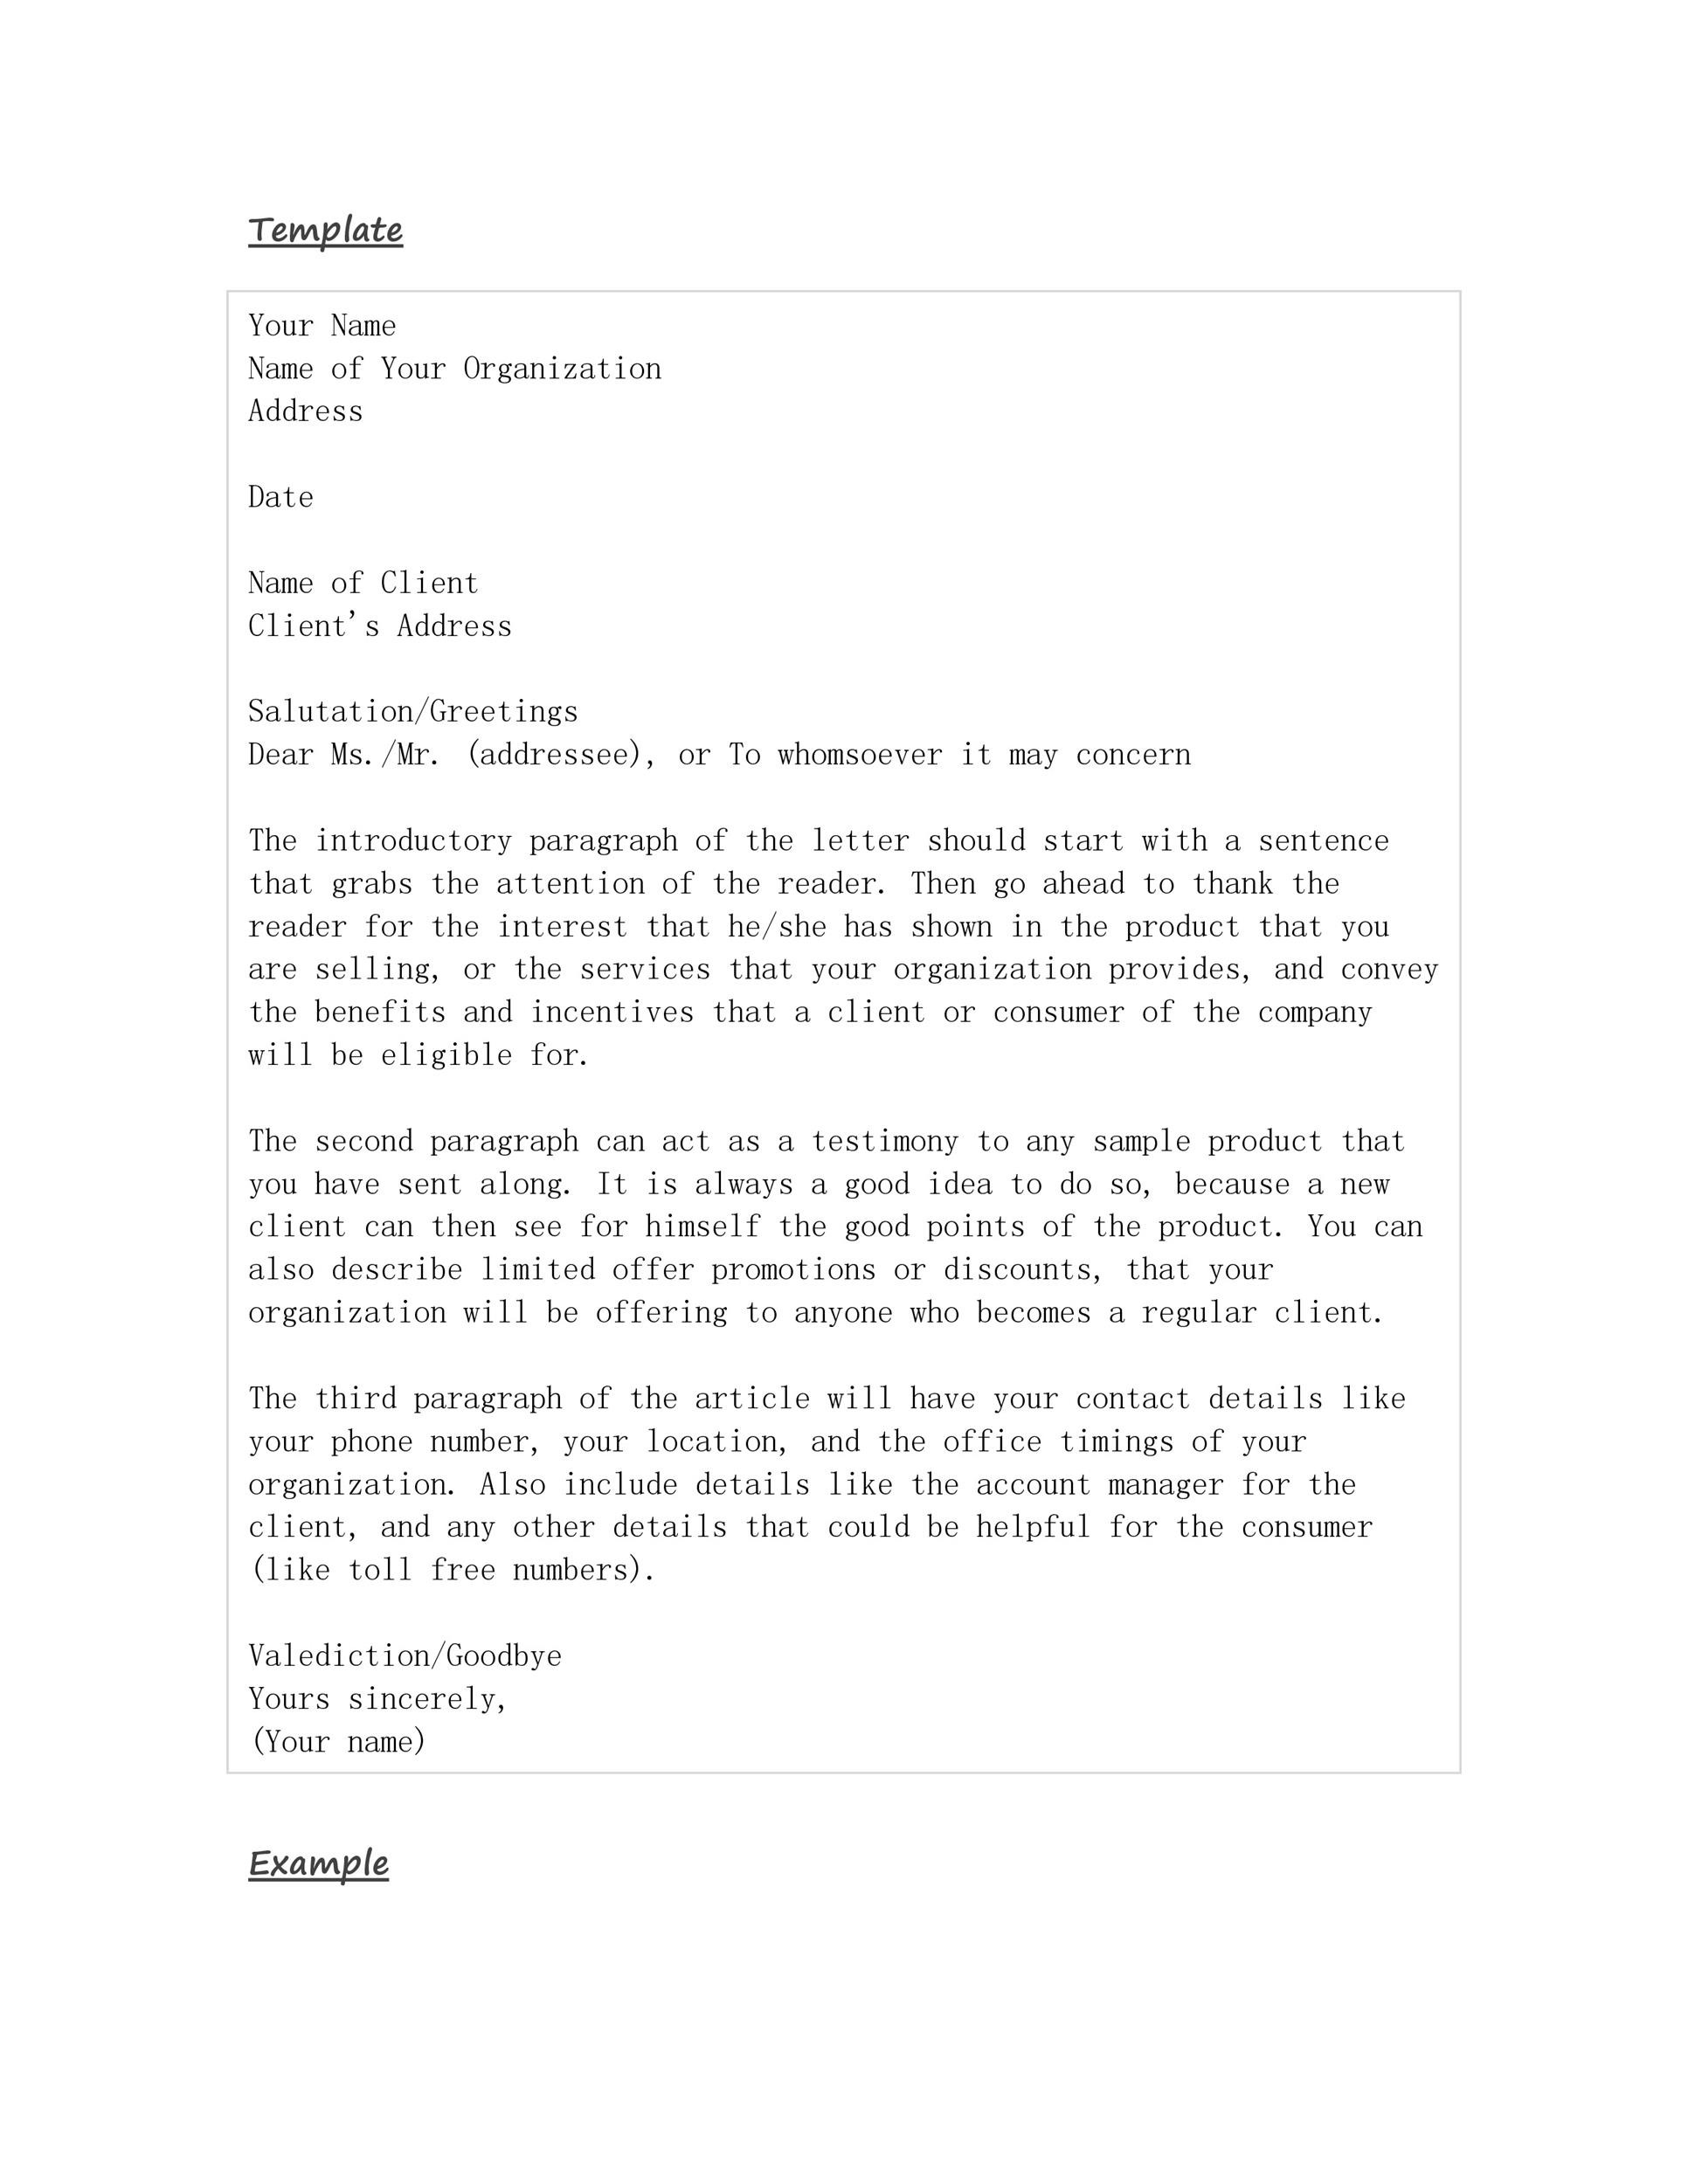 Free sales letter template 12